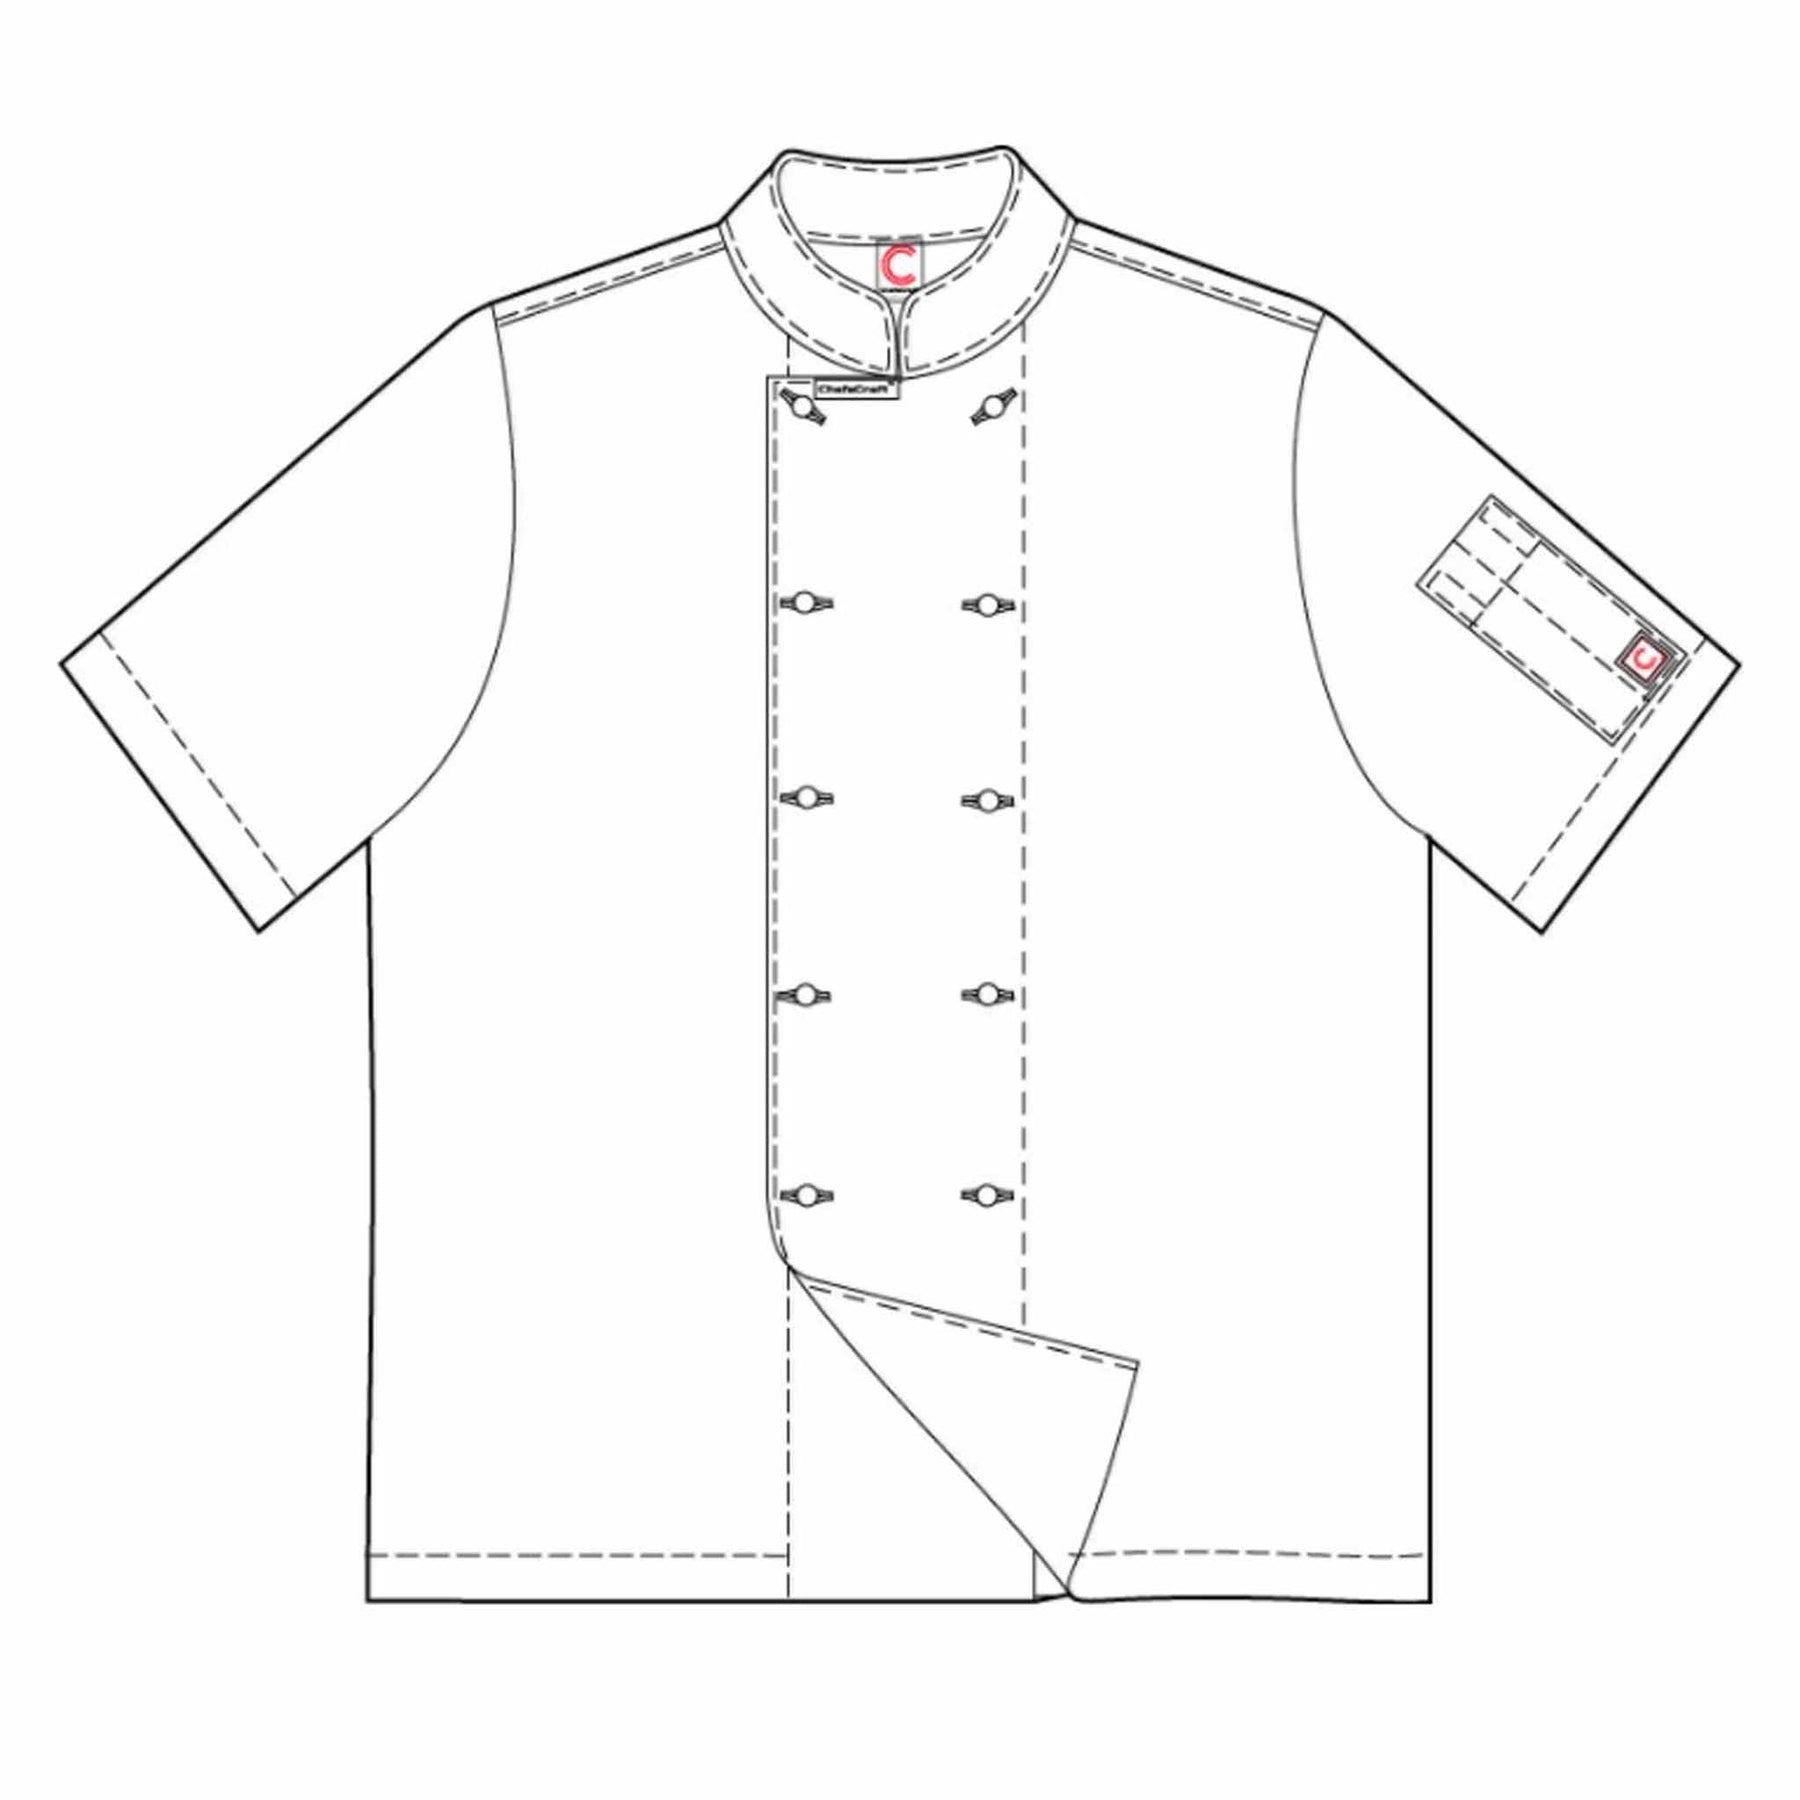 classic short sleeve chefs jacket outline